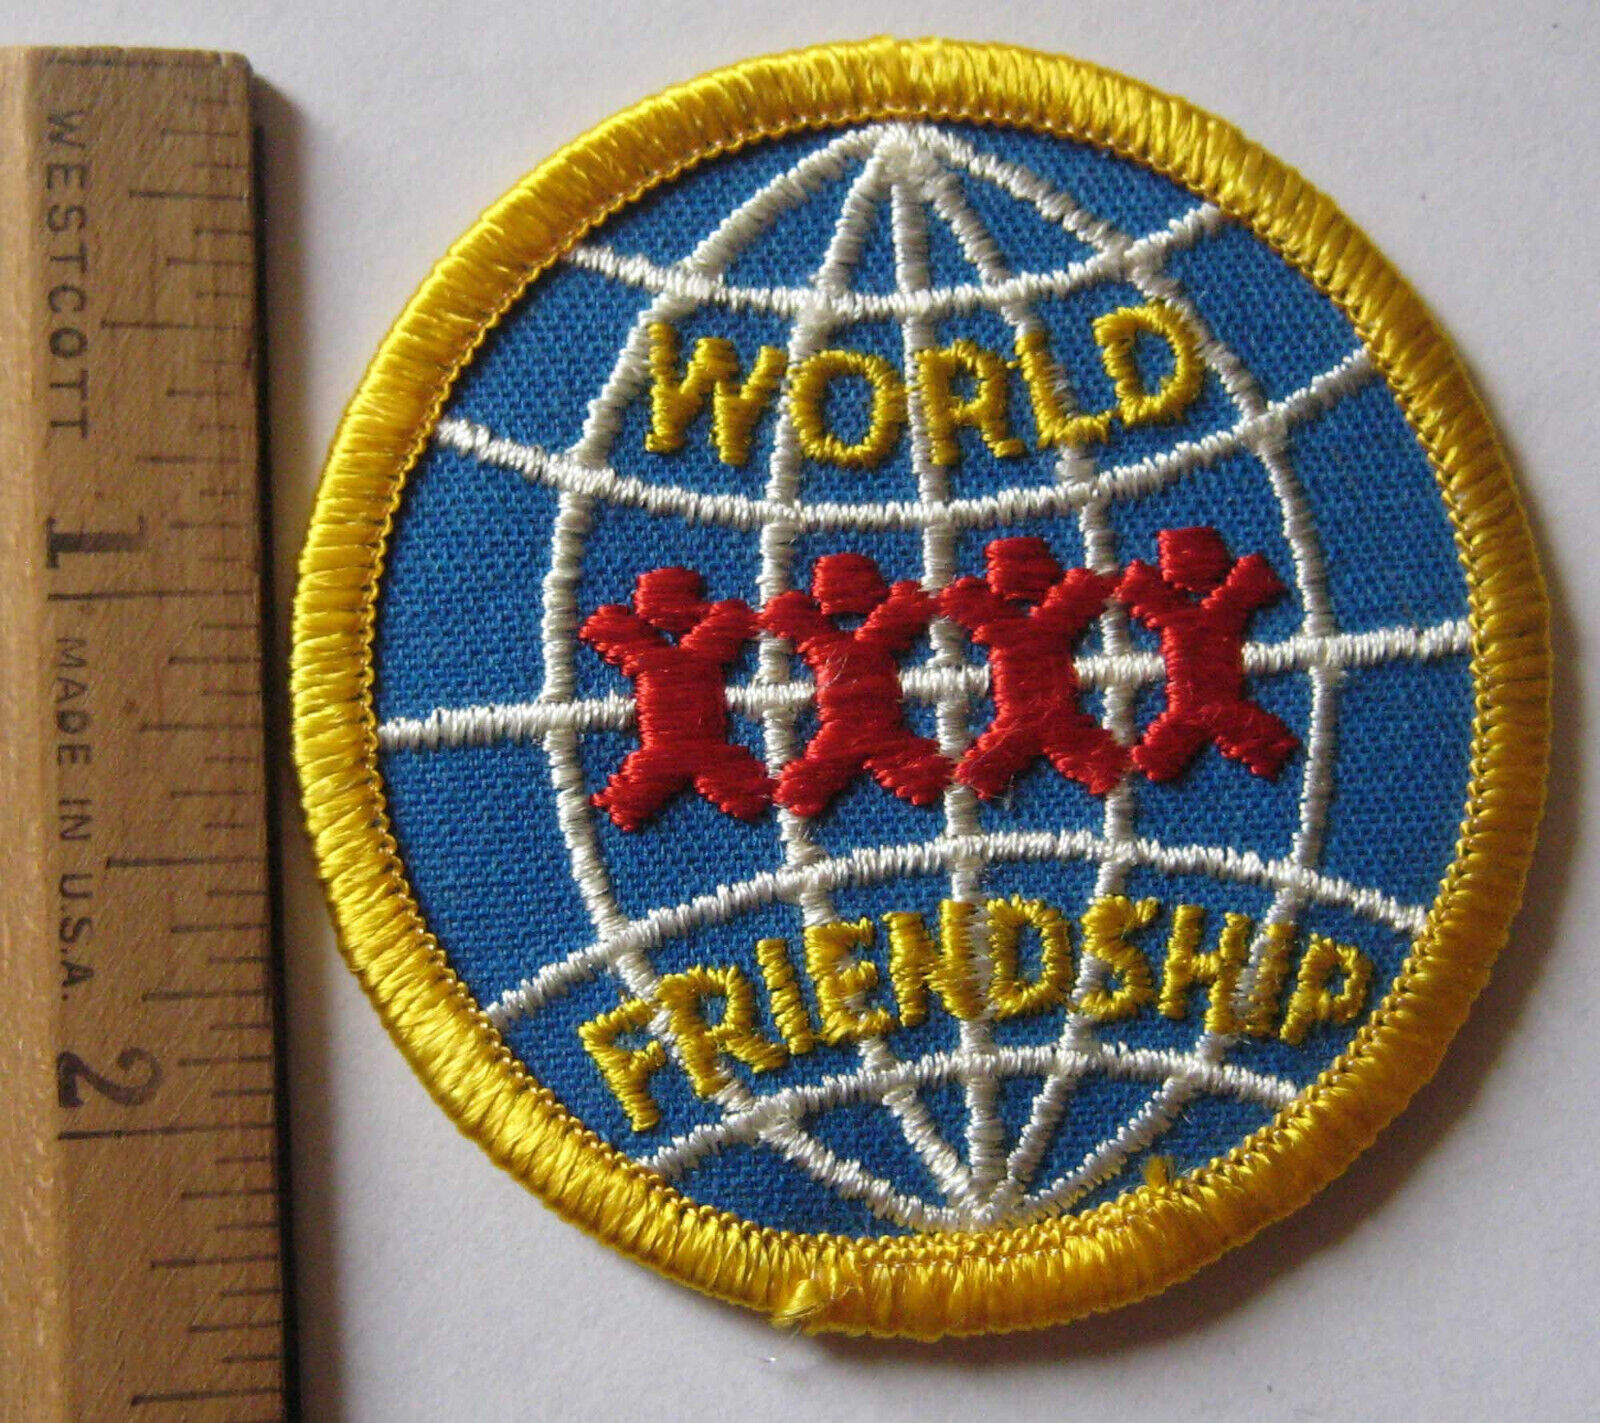 Vintage Girl Scout WORLD FRIENDSHIP CELEBRATION PATCH Thinking Day UNDATED New